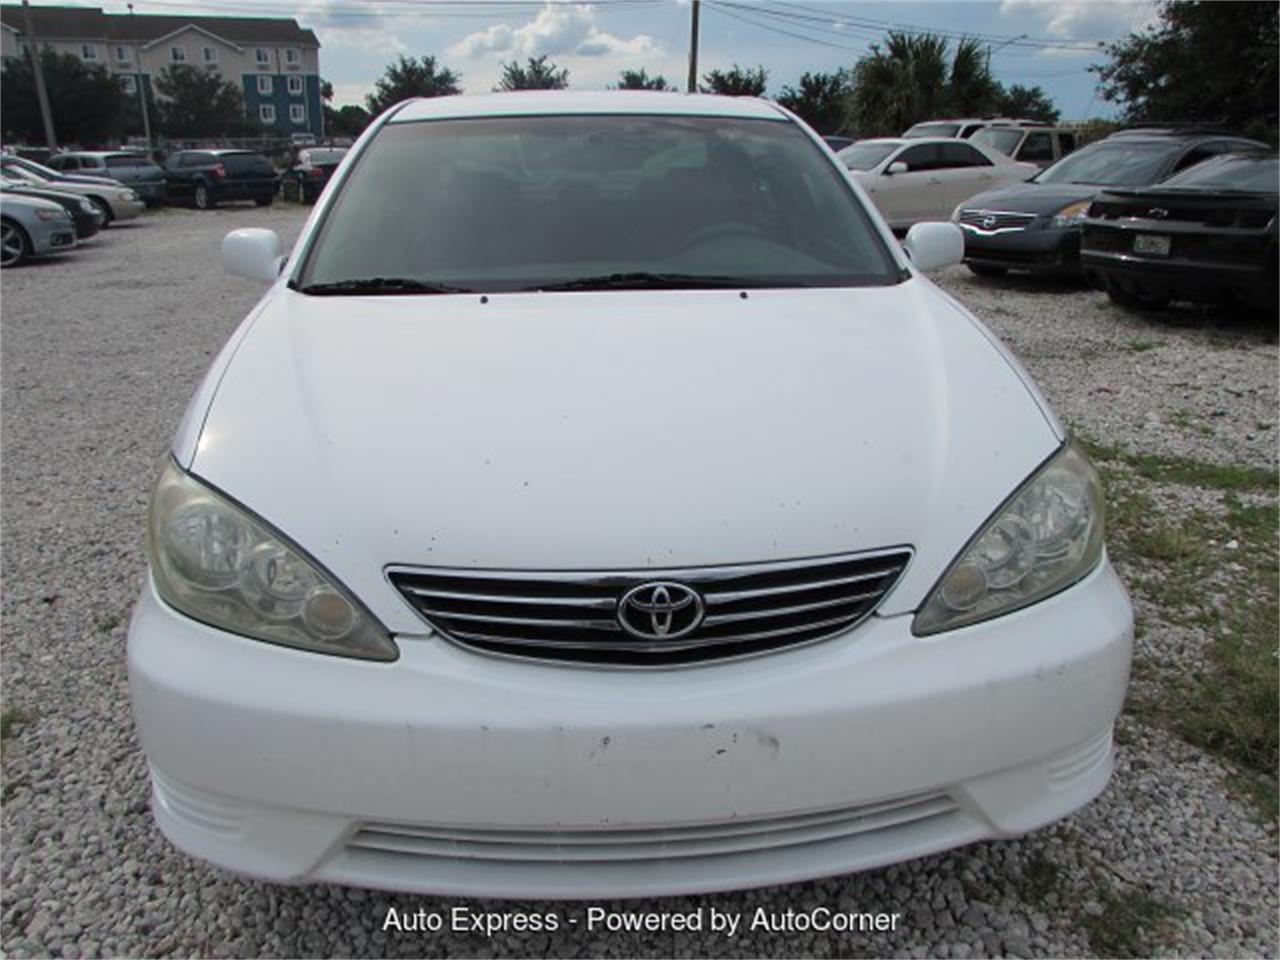 2005 Toyota Camry for sale in Orlando, FL